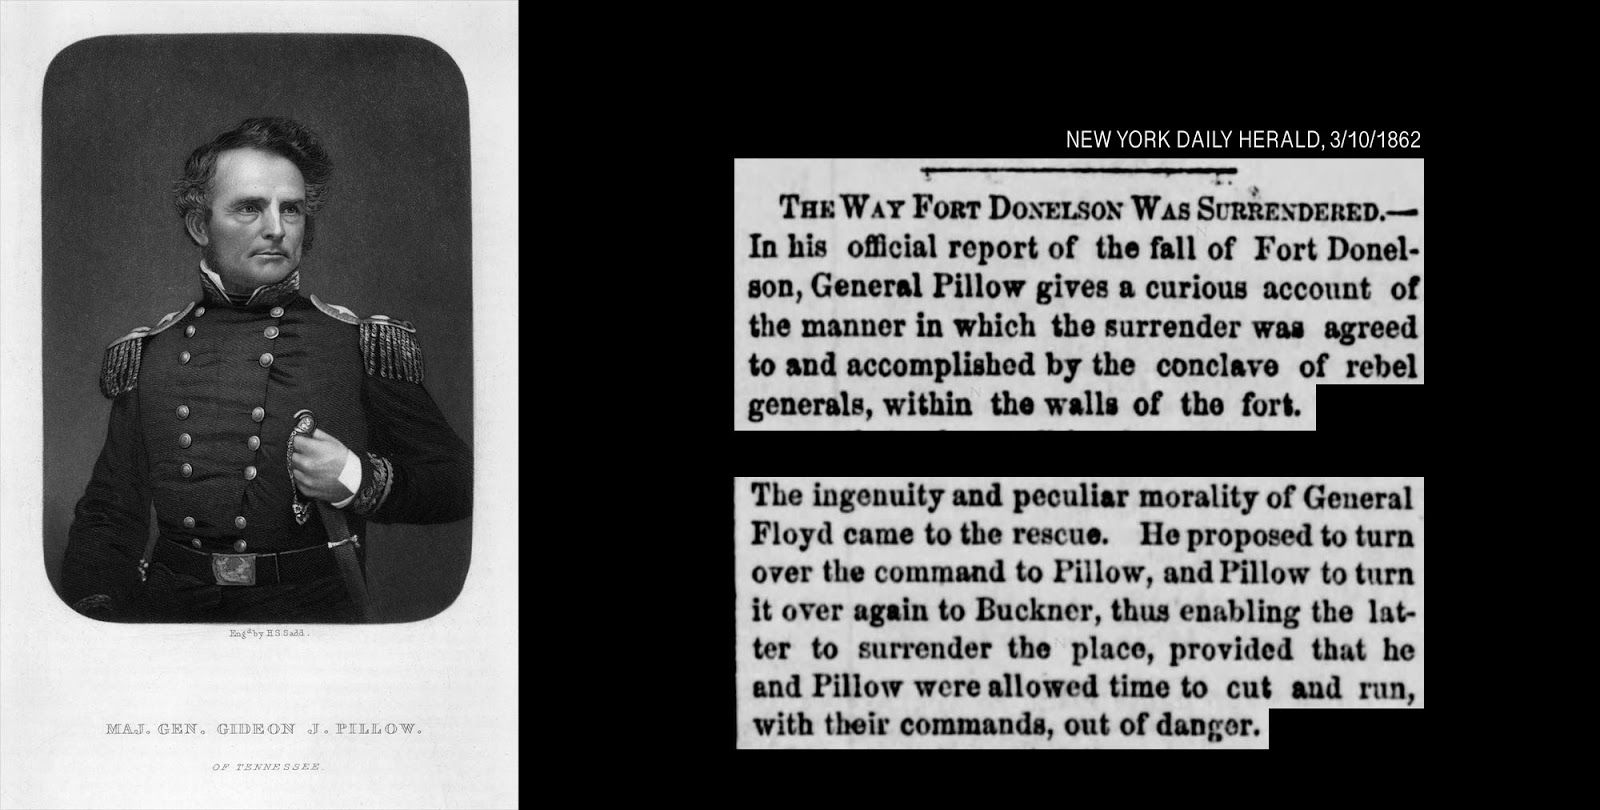 Illustration of Confederate general Gideon Pillow. An 1862 newspaper clipping notes that General Pillow conspired to pass command of Fort Donelson to another general so that he himself could cut and run.